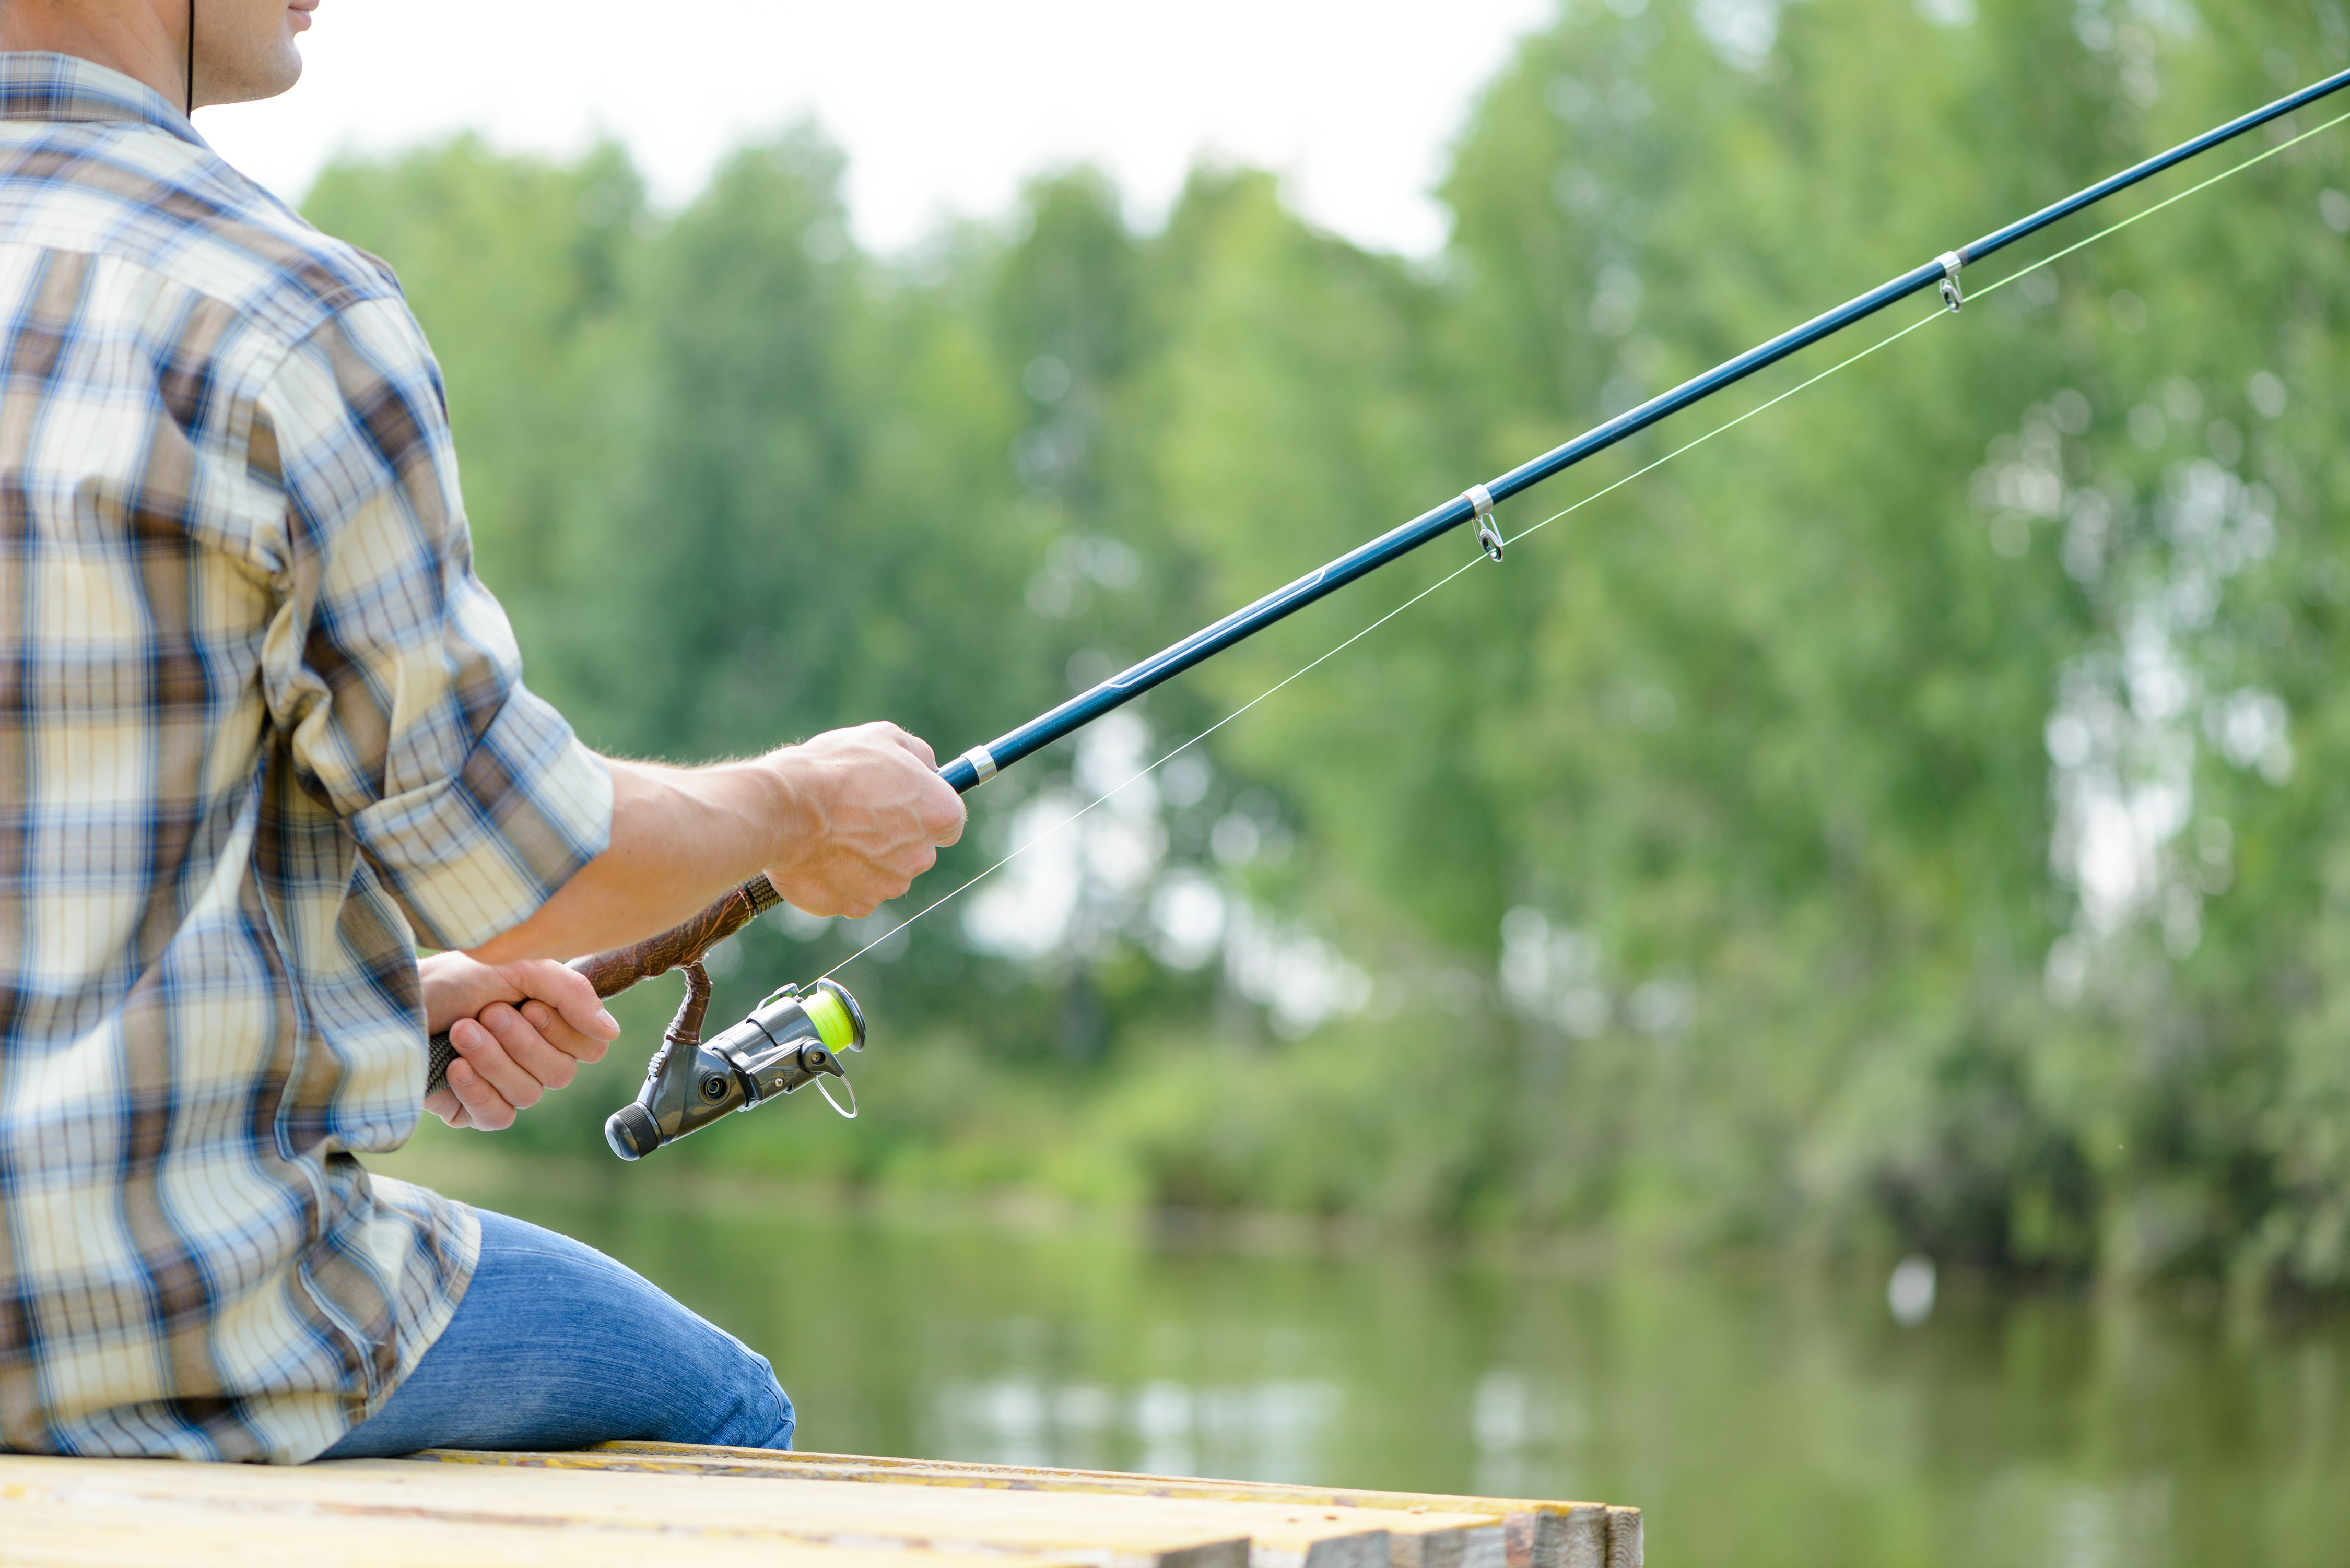 Local Sports in Brief Free Fishing Day June 1 at Goldwater Lake in